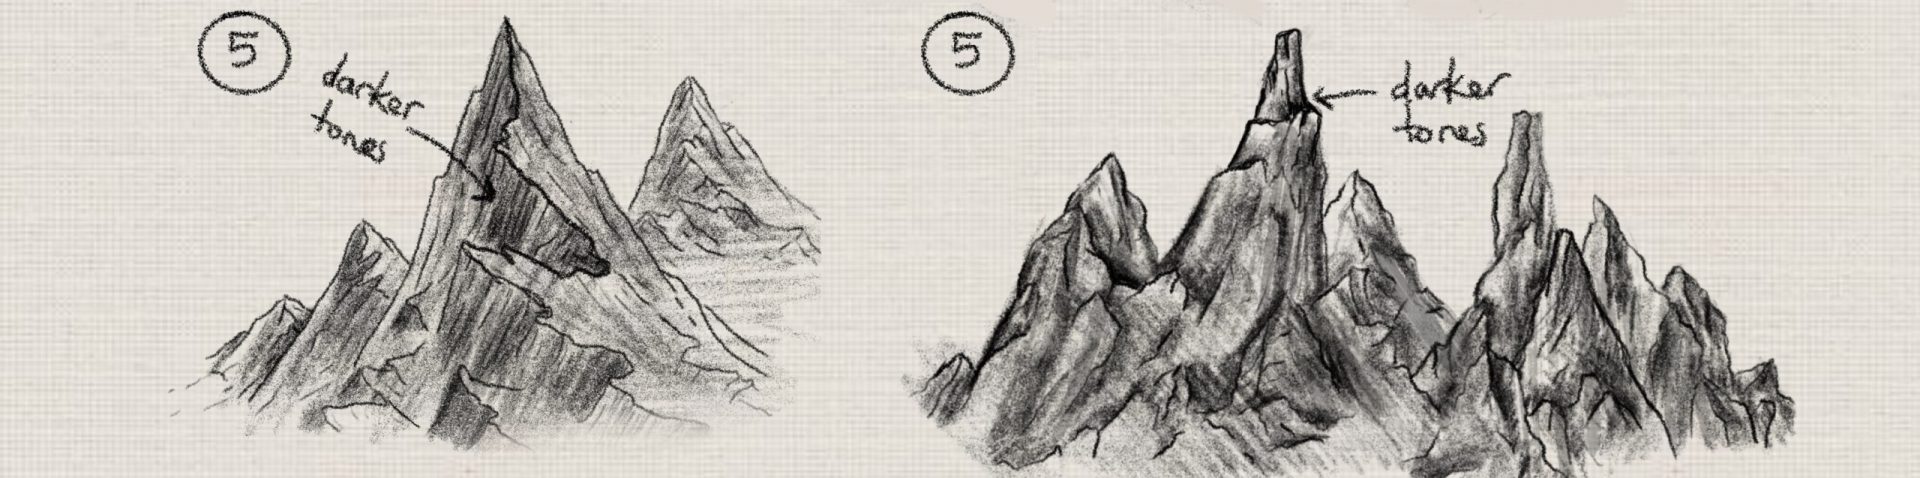 step by step mountain drawings